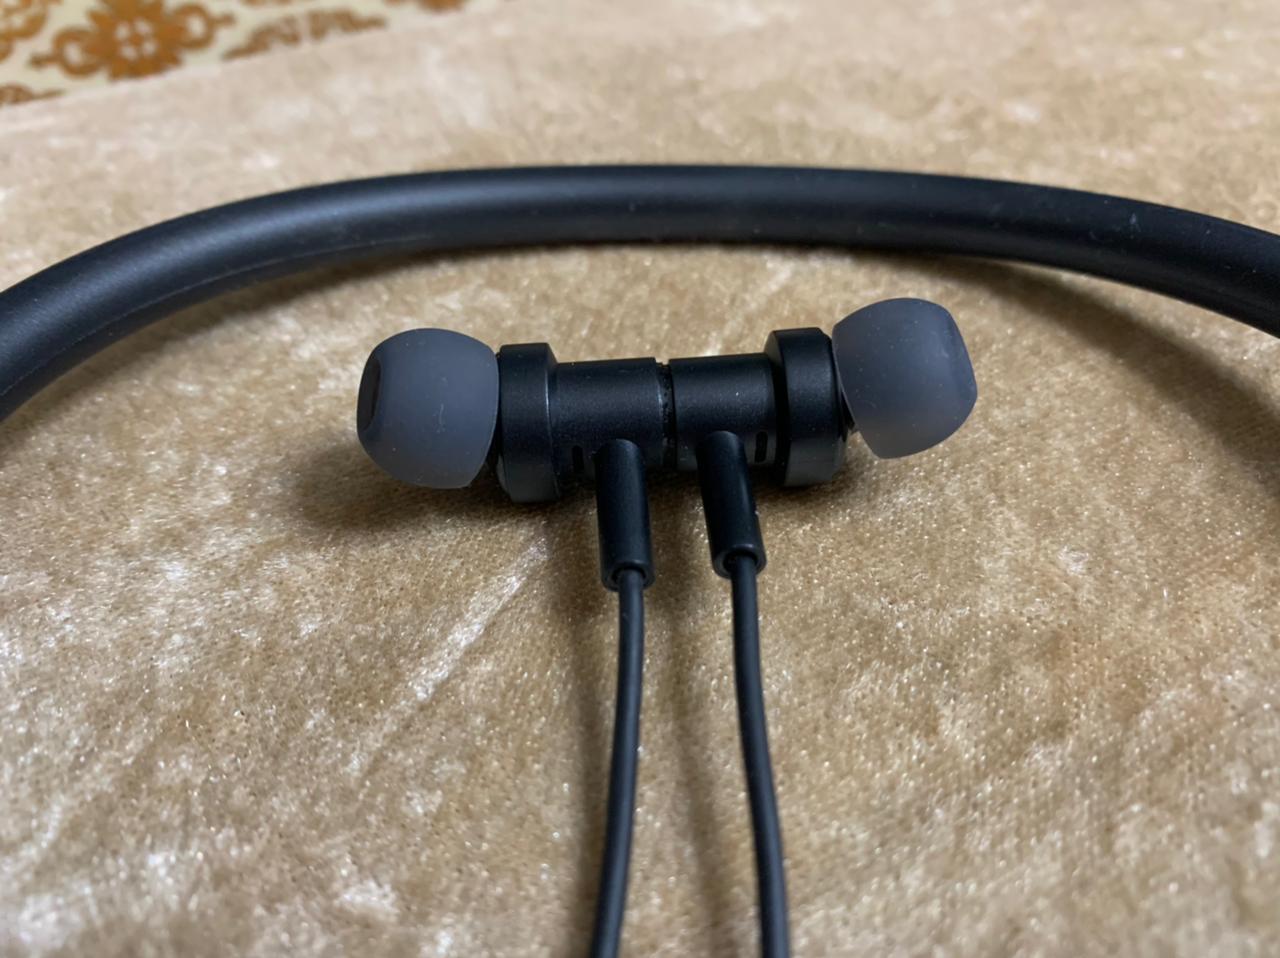 Mi Neckband Bluetooth Earphones Pro review: ANC on a budget | Wearables ...